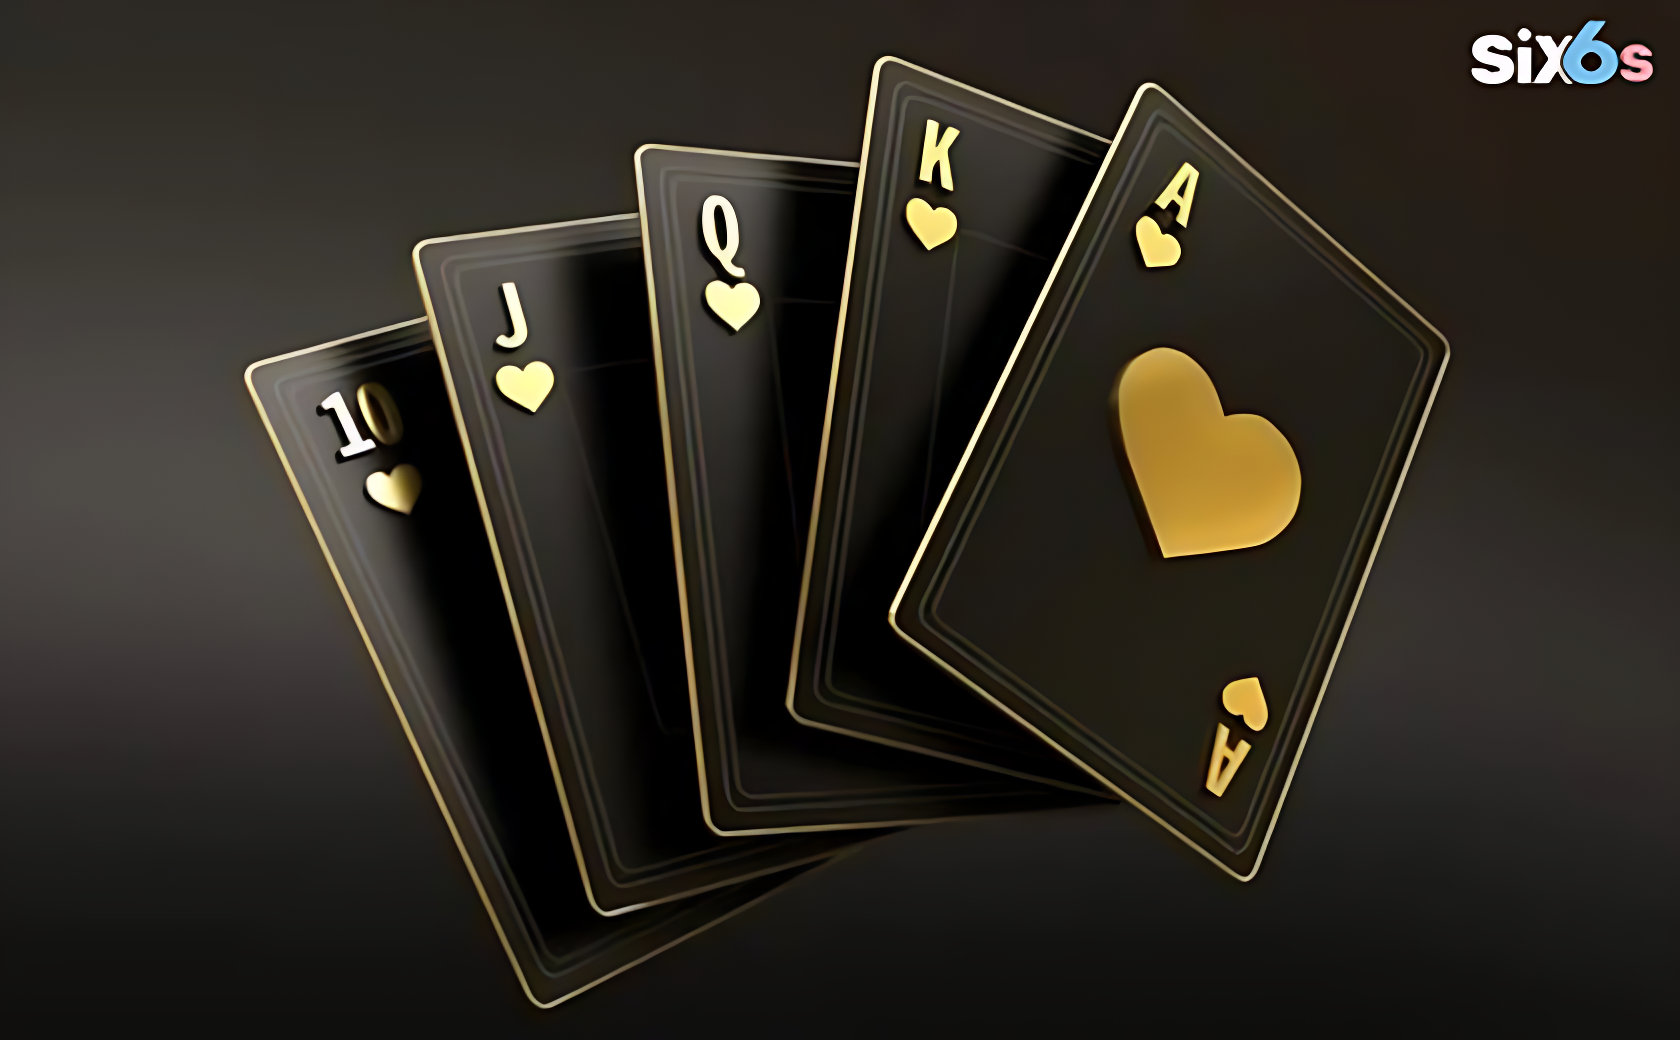 cards on the table for explaining online Live Teen Patti at six6s